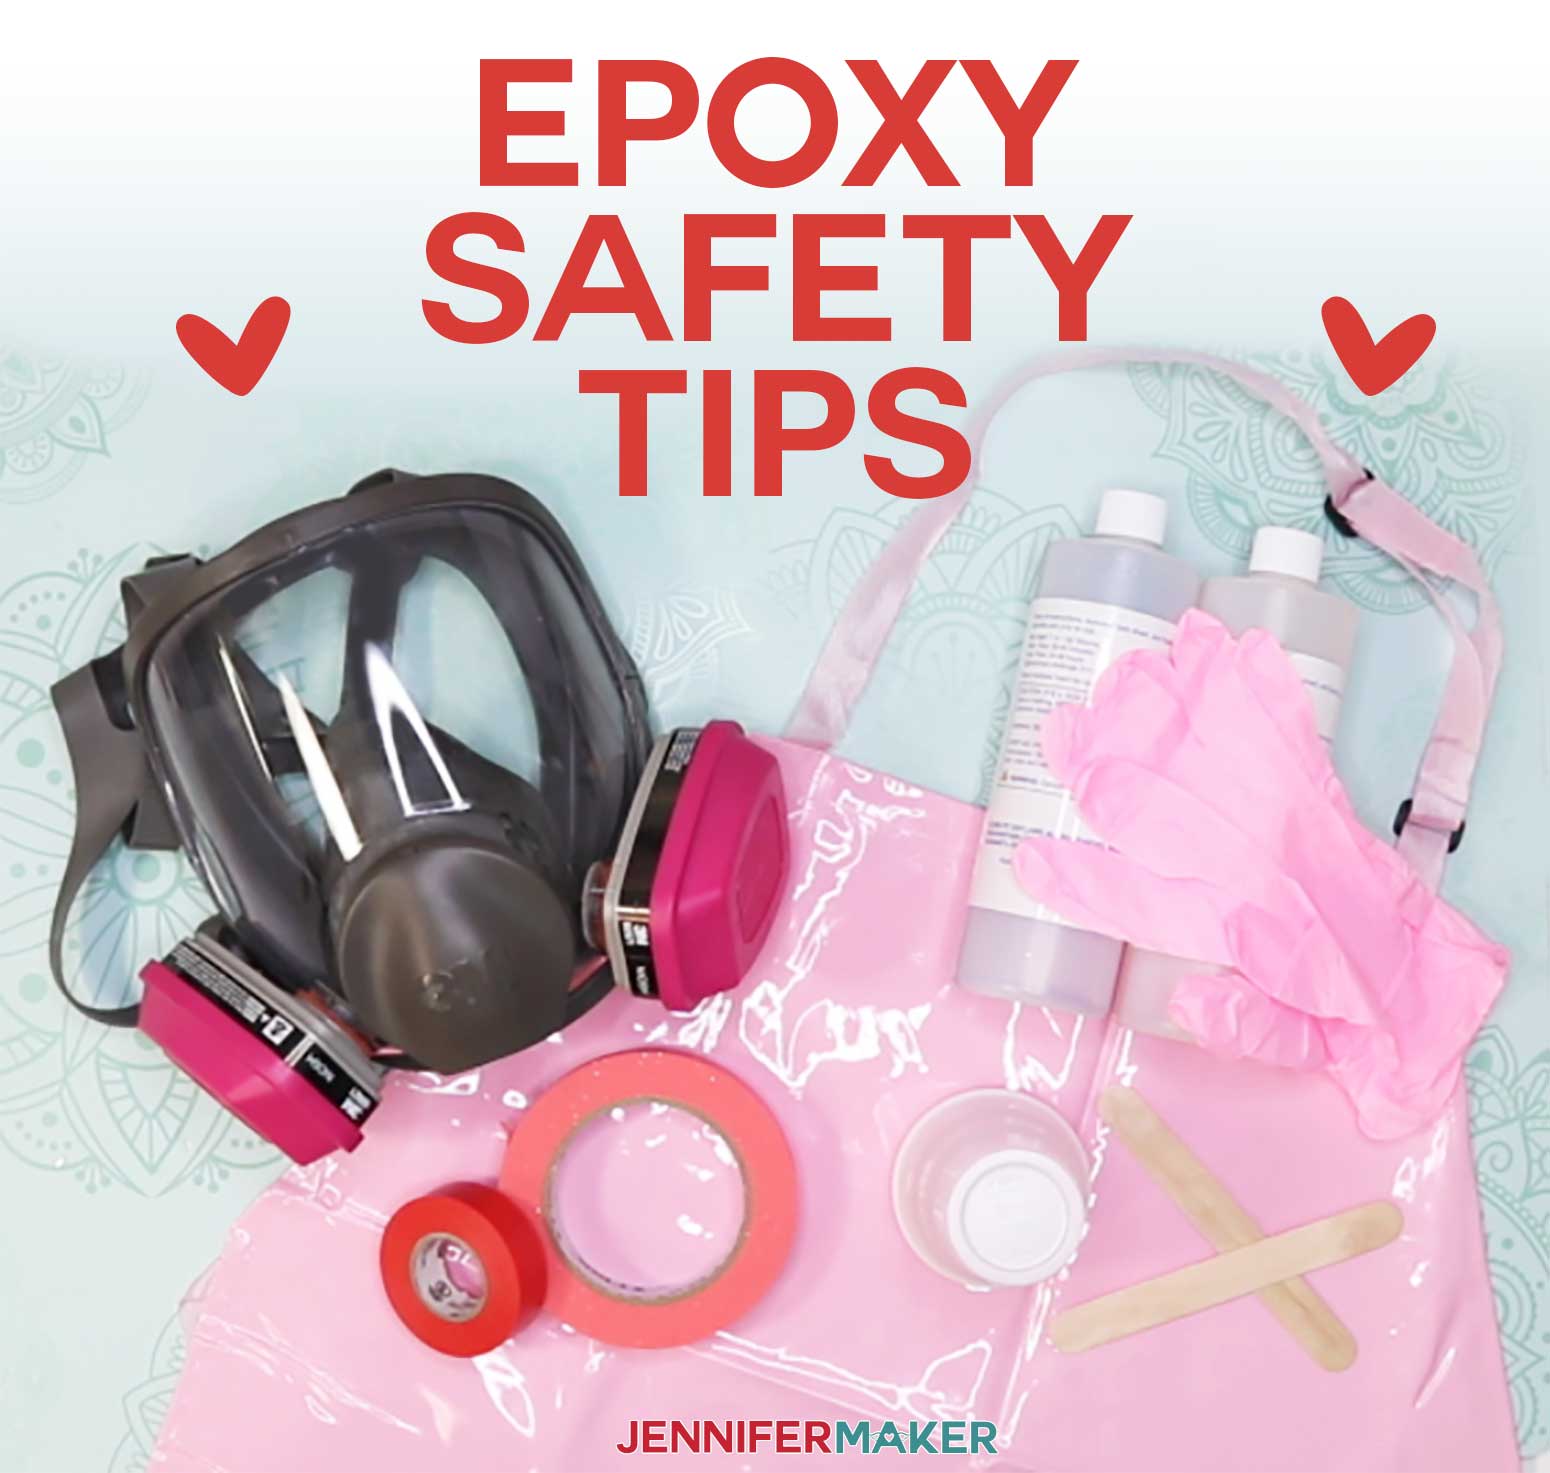 Epoxy Safety: How to Make Tumblers Safely